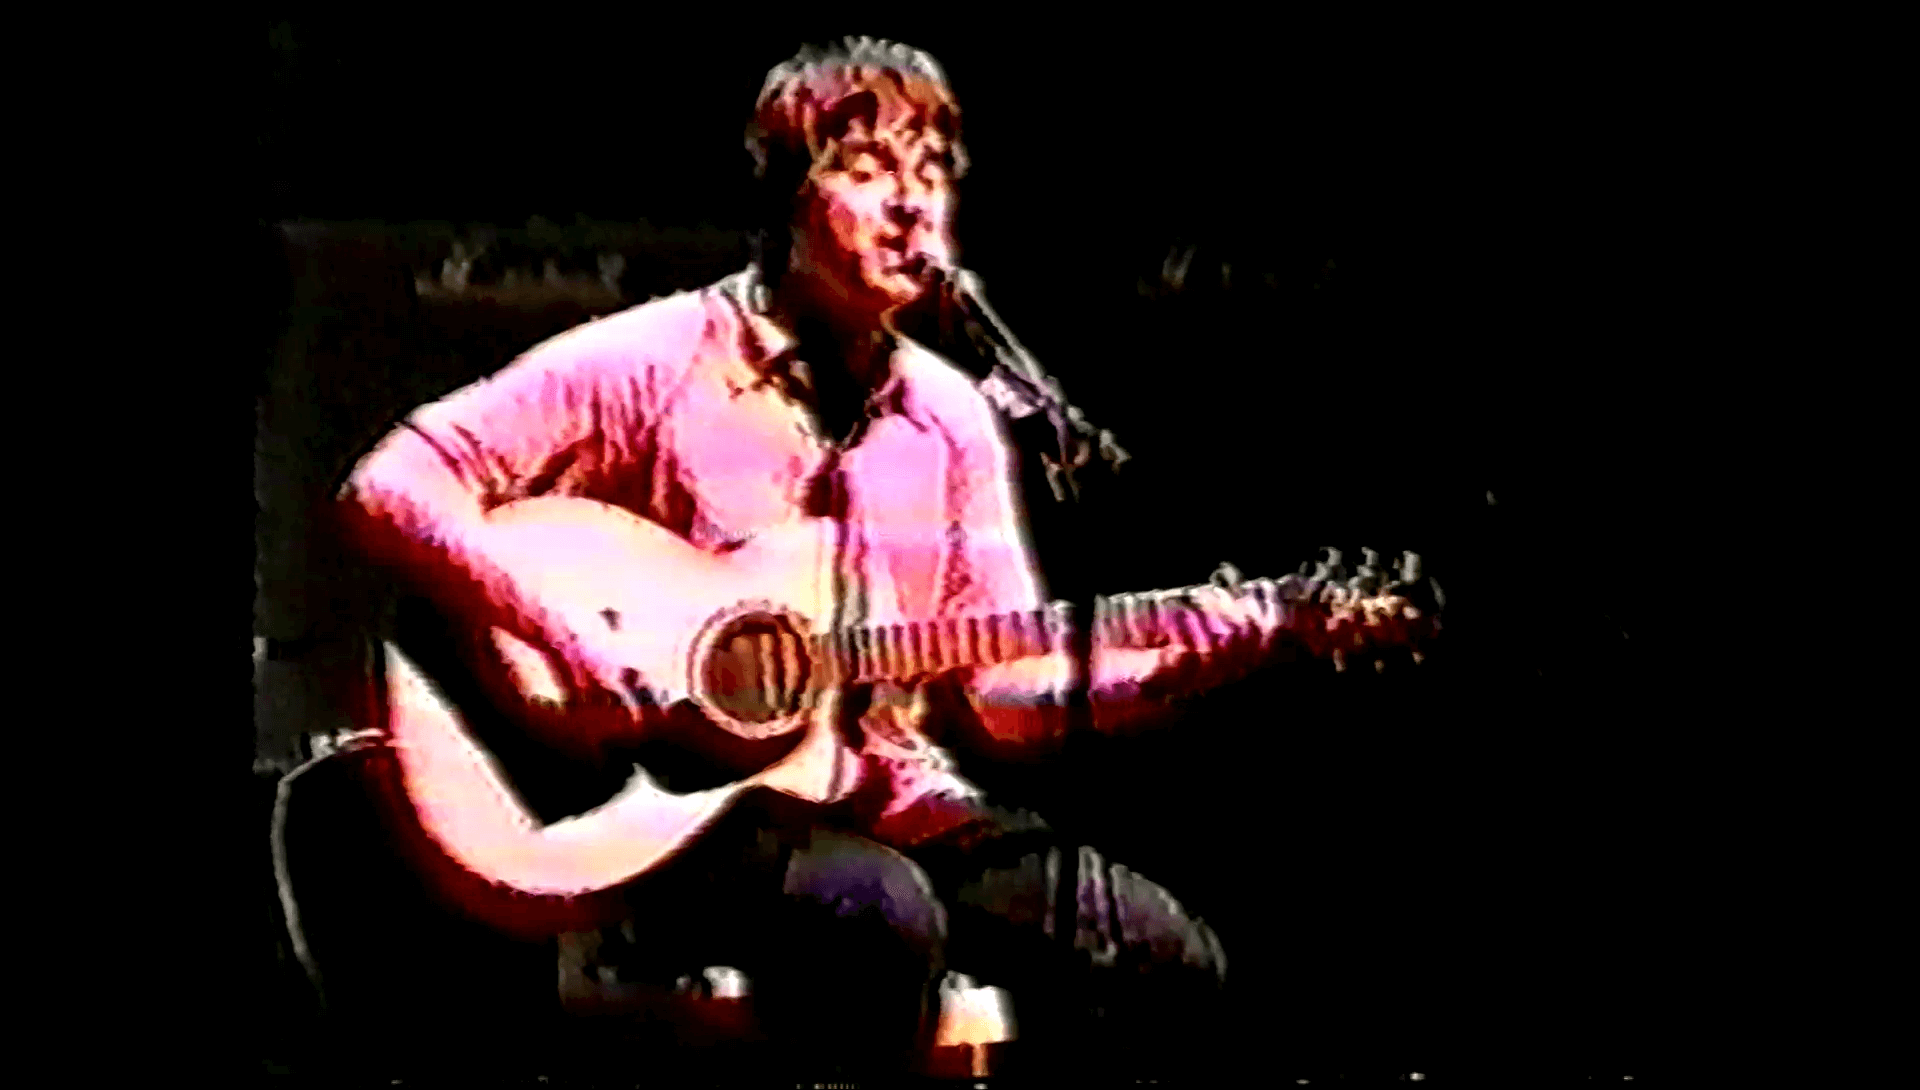 Oasis at Newport Center; Wales - August 6, 1998